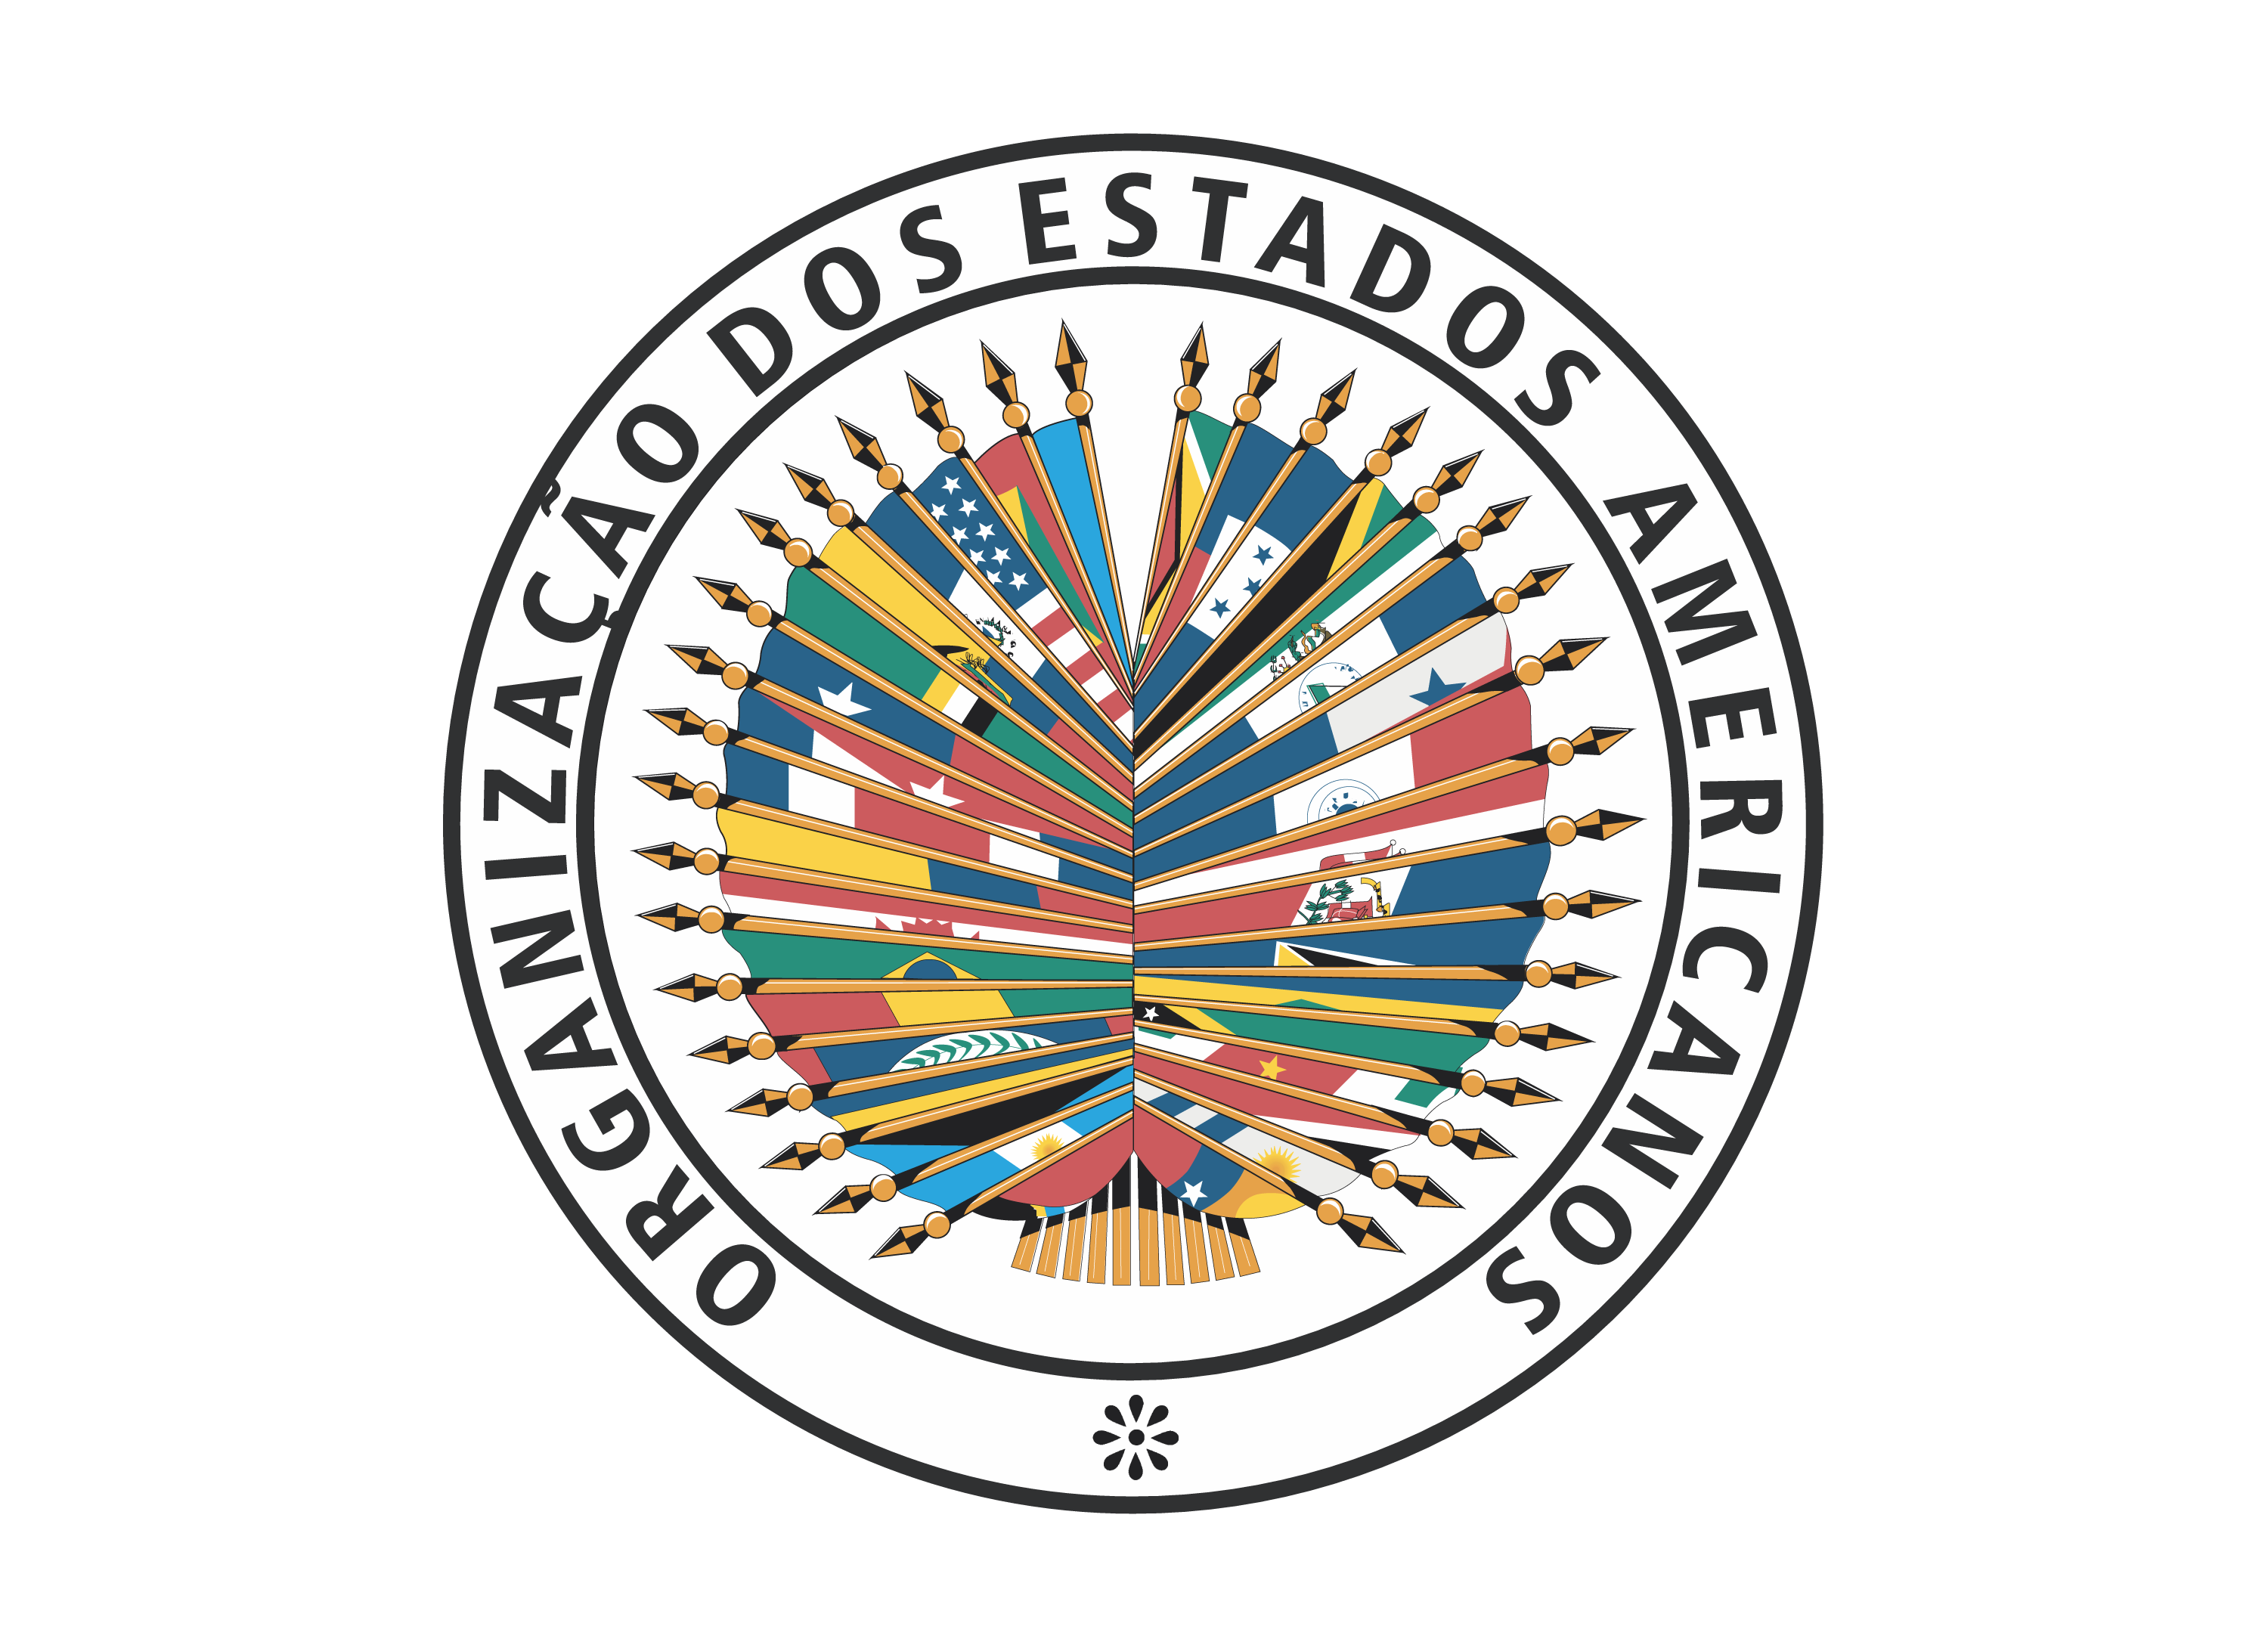 OAS Seal of the Organization of American States 1